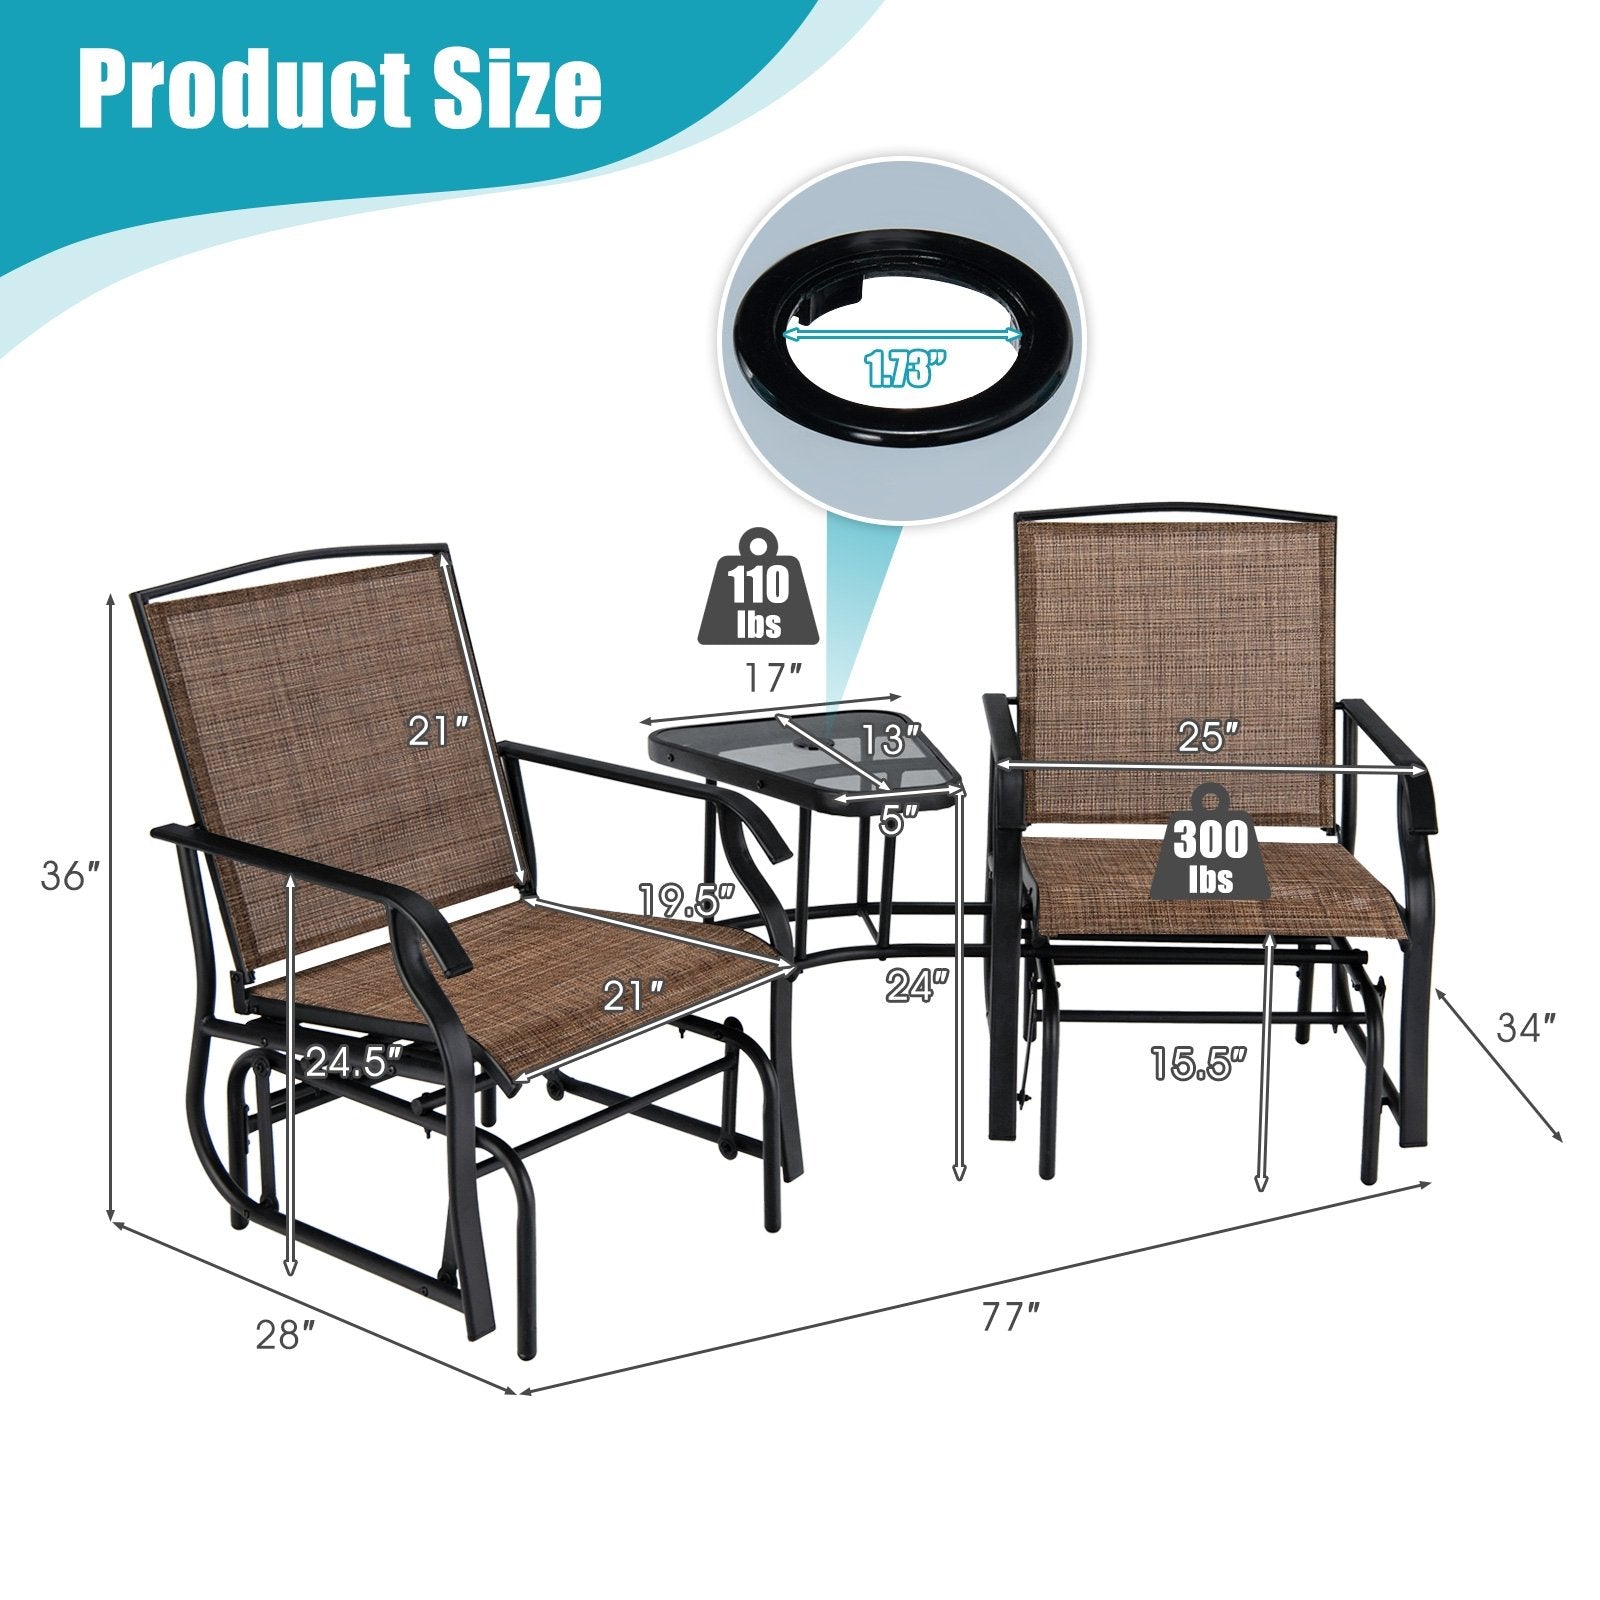 Double Swing Glider Rocker Chair set with Glass Table, Brown - Gallery Canada